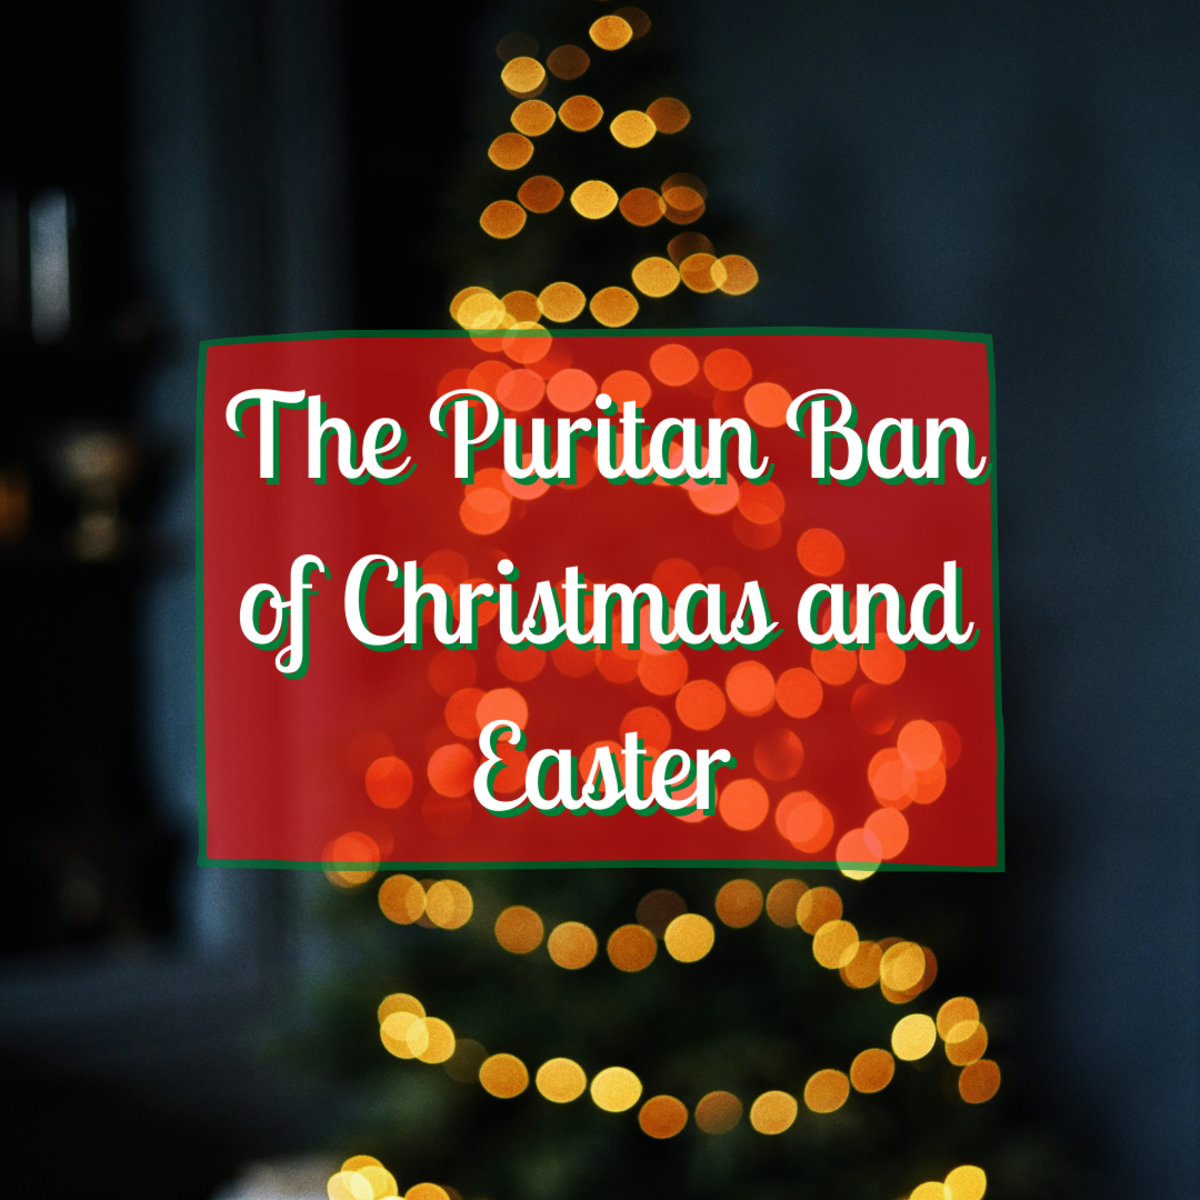 Christmas and Easter were once banned in the United States and in England. Read on to learn about when Puritan leaders outlawed these holidays due to their belief that they were excuses for sinful behavior.